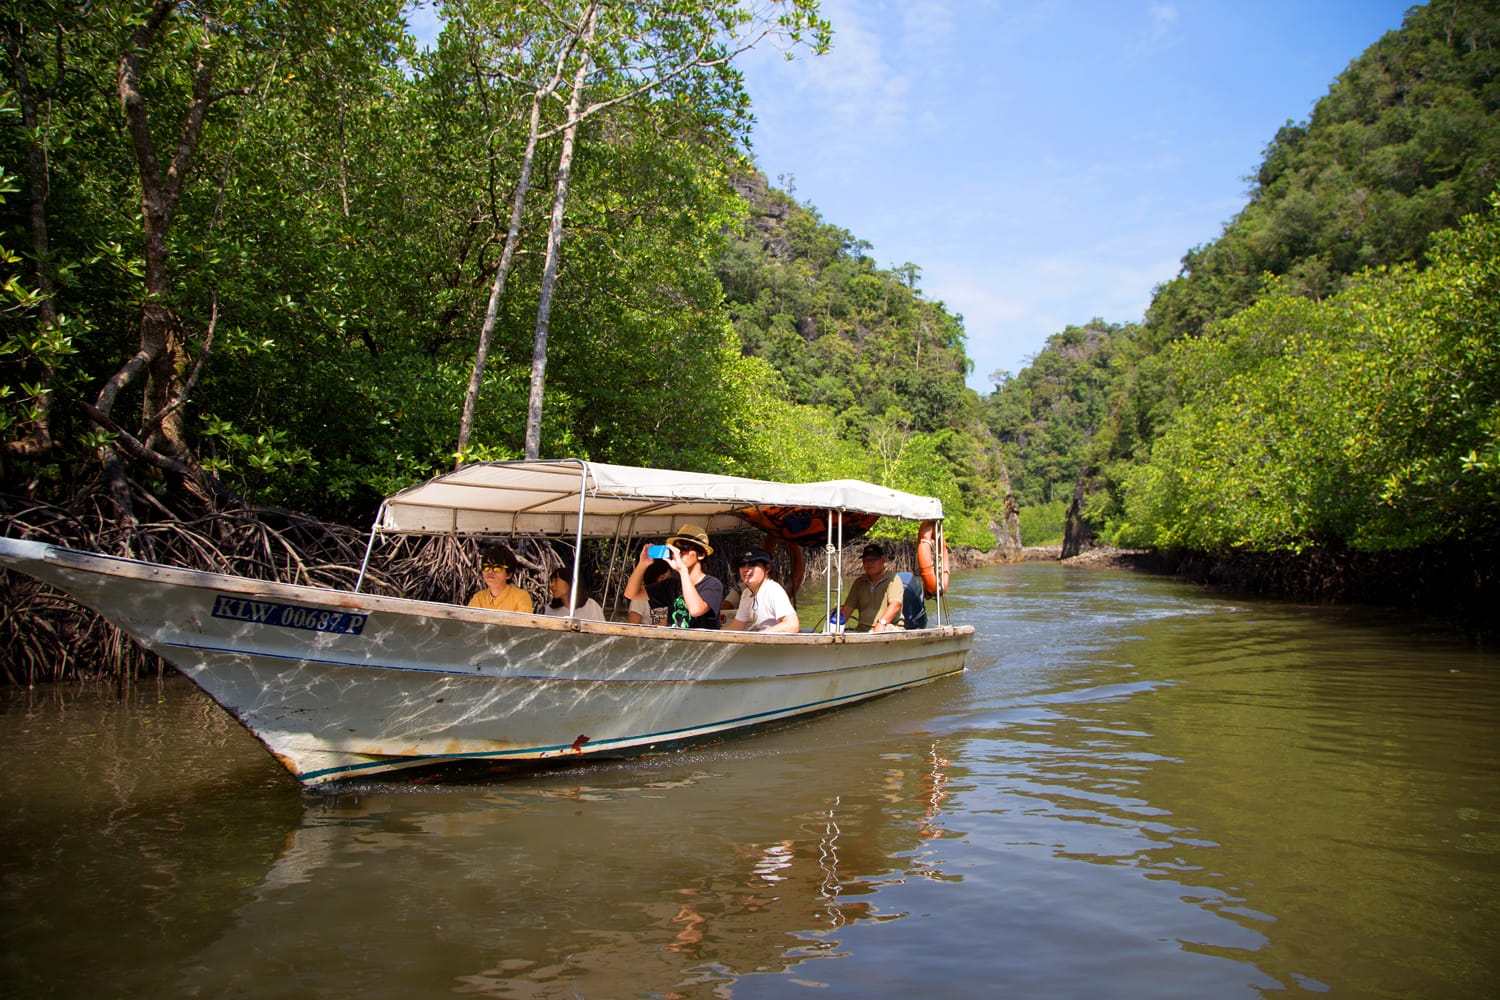 Tourists travel by boat at Kilim Karst Geoforest park in Langkawi, Malaysia